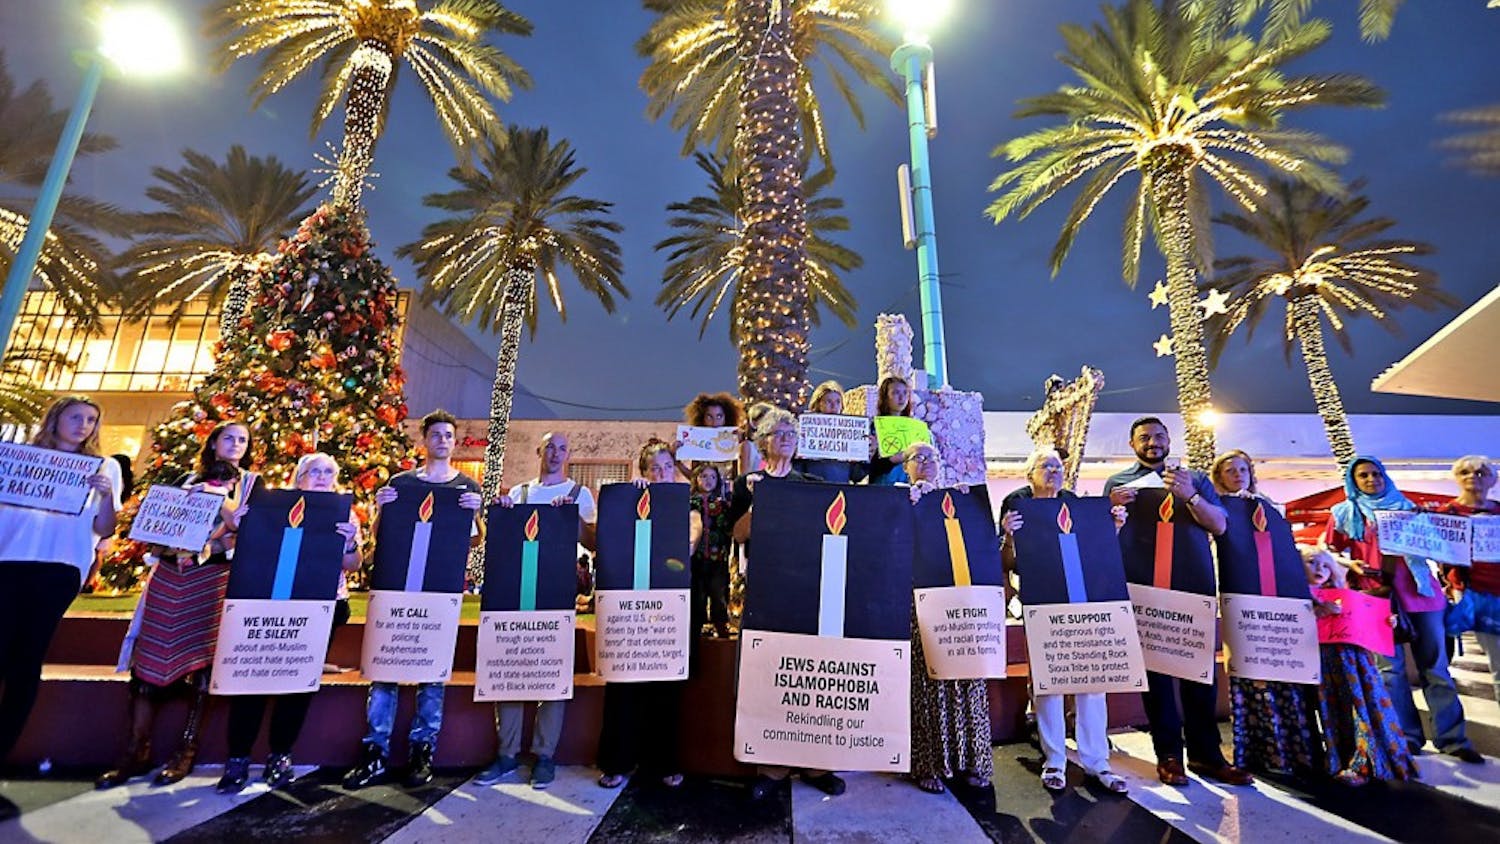 A group gathered on Wednesday, Dec. 21, 2016 on Lincoln Road on Miami Beach in Florida, making a commitment to fighting Islamophobia and racism. (Patrick Farrell/Miami Herald/TNS)